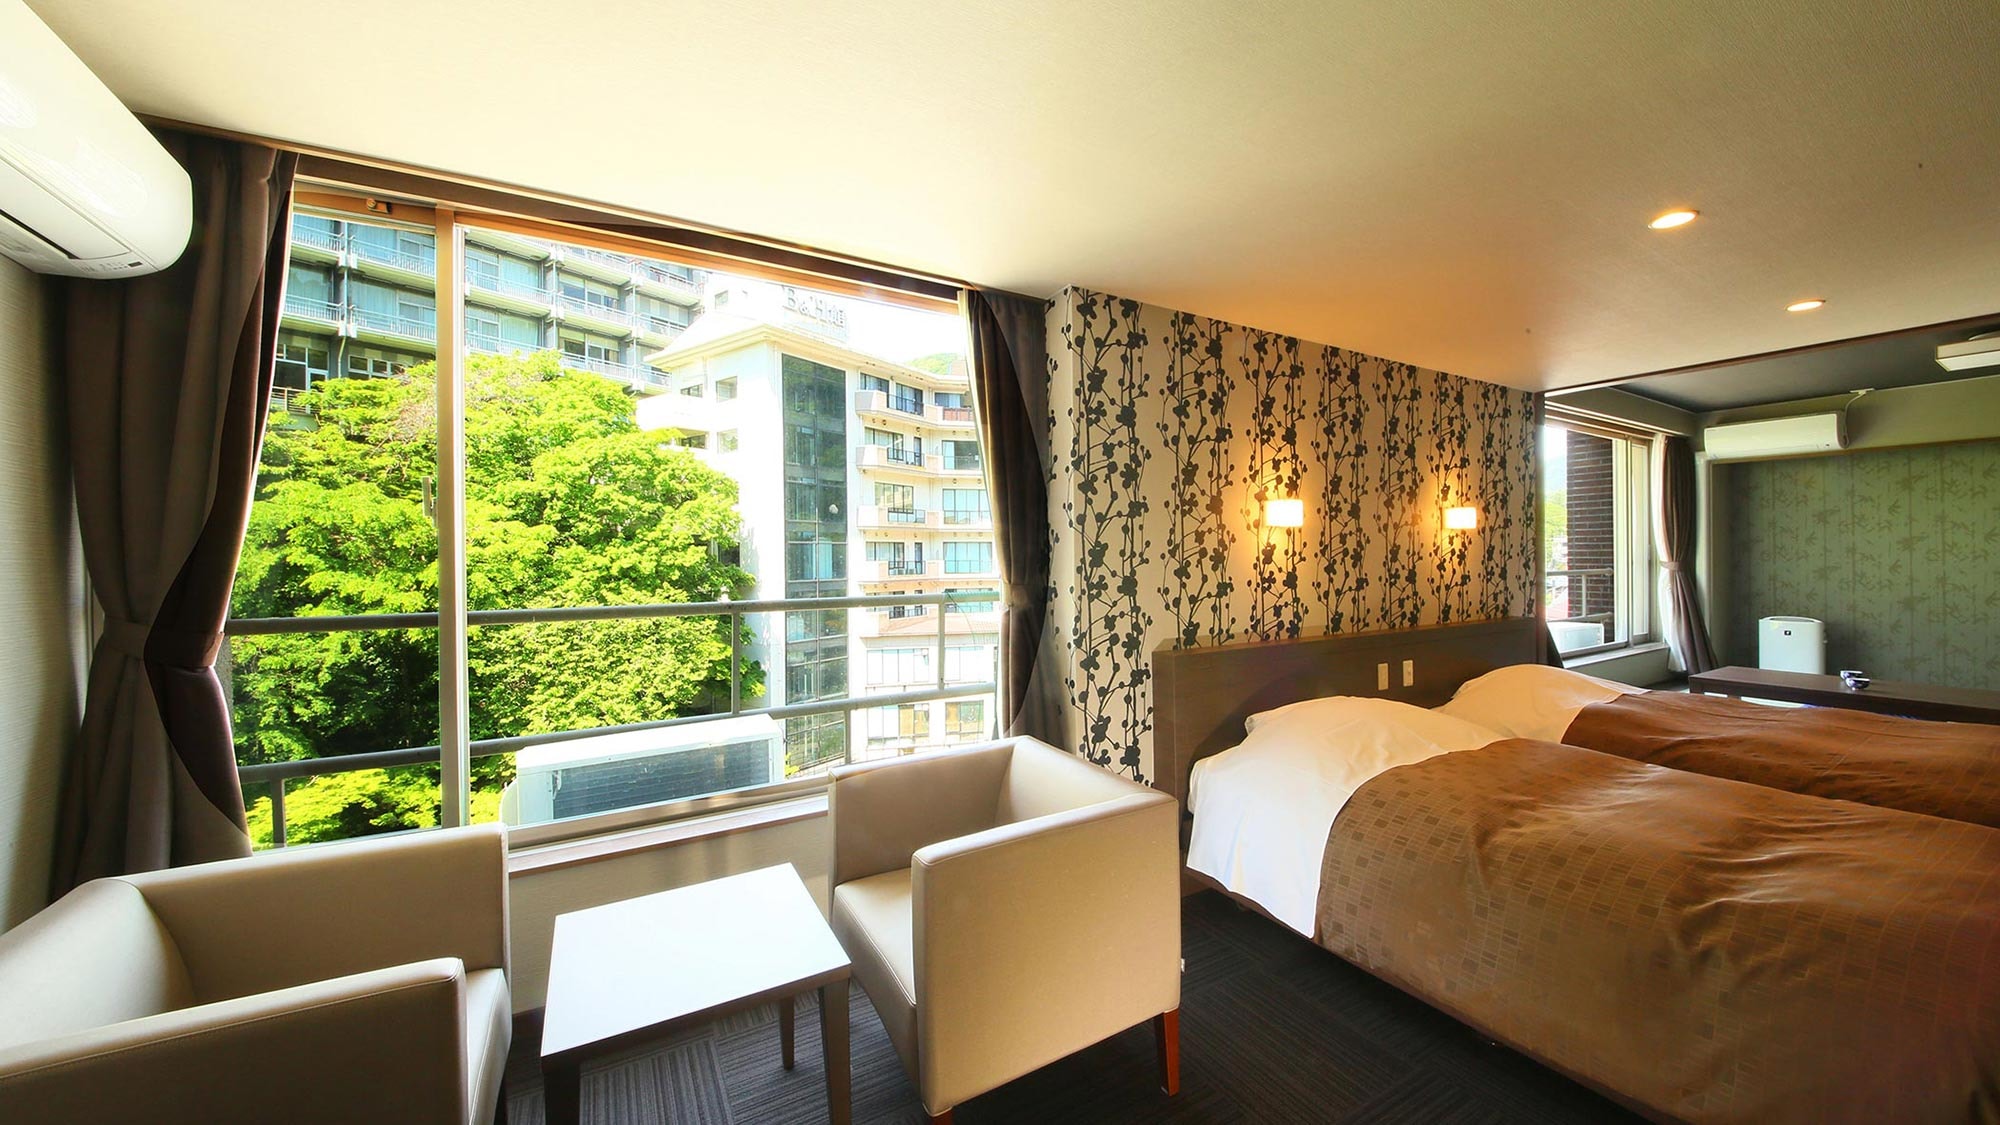 We have various types of rooms such as Japanese-style rooms, Western-style rooms, and Japanese-Western style rooms.